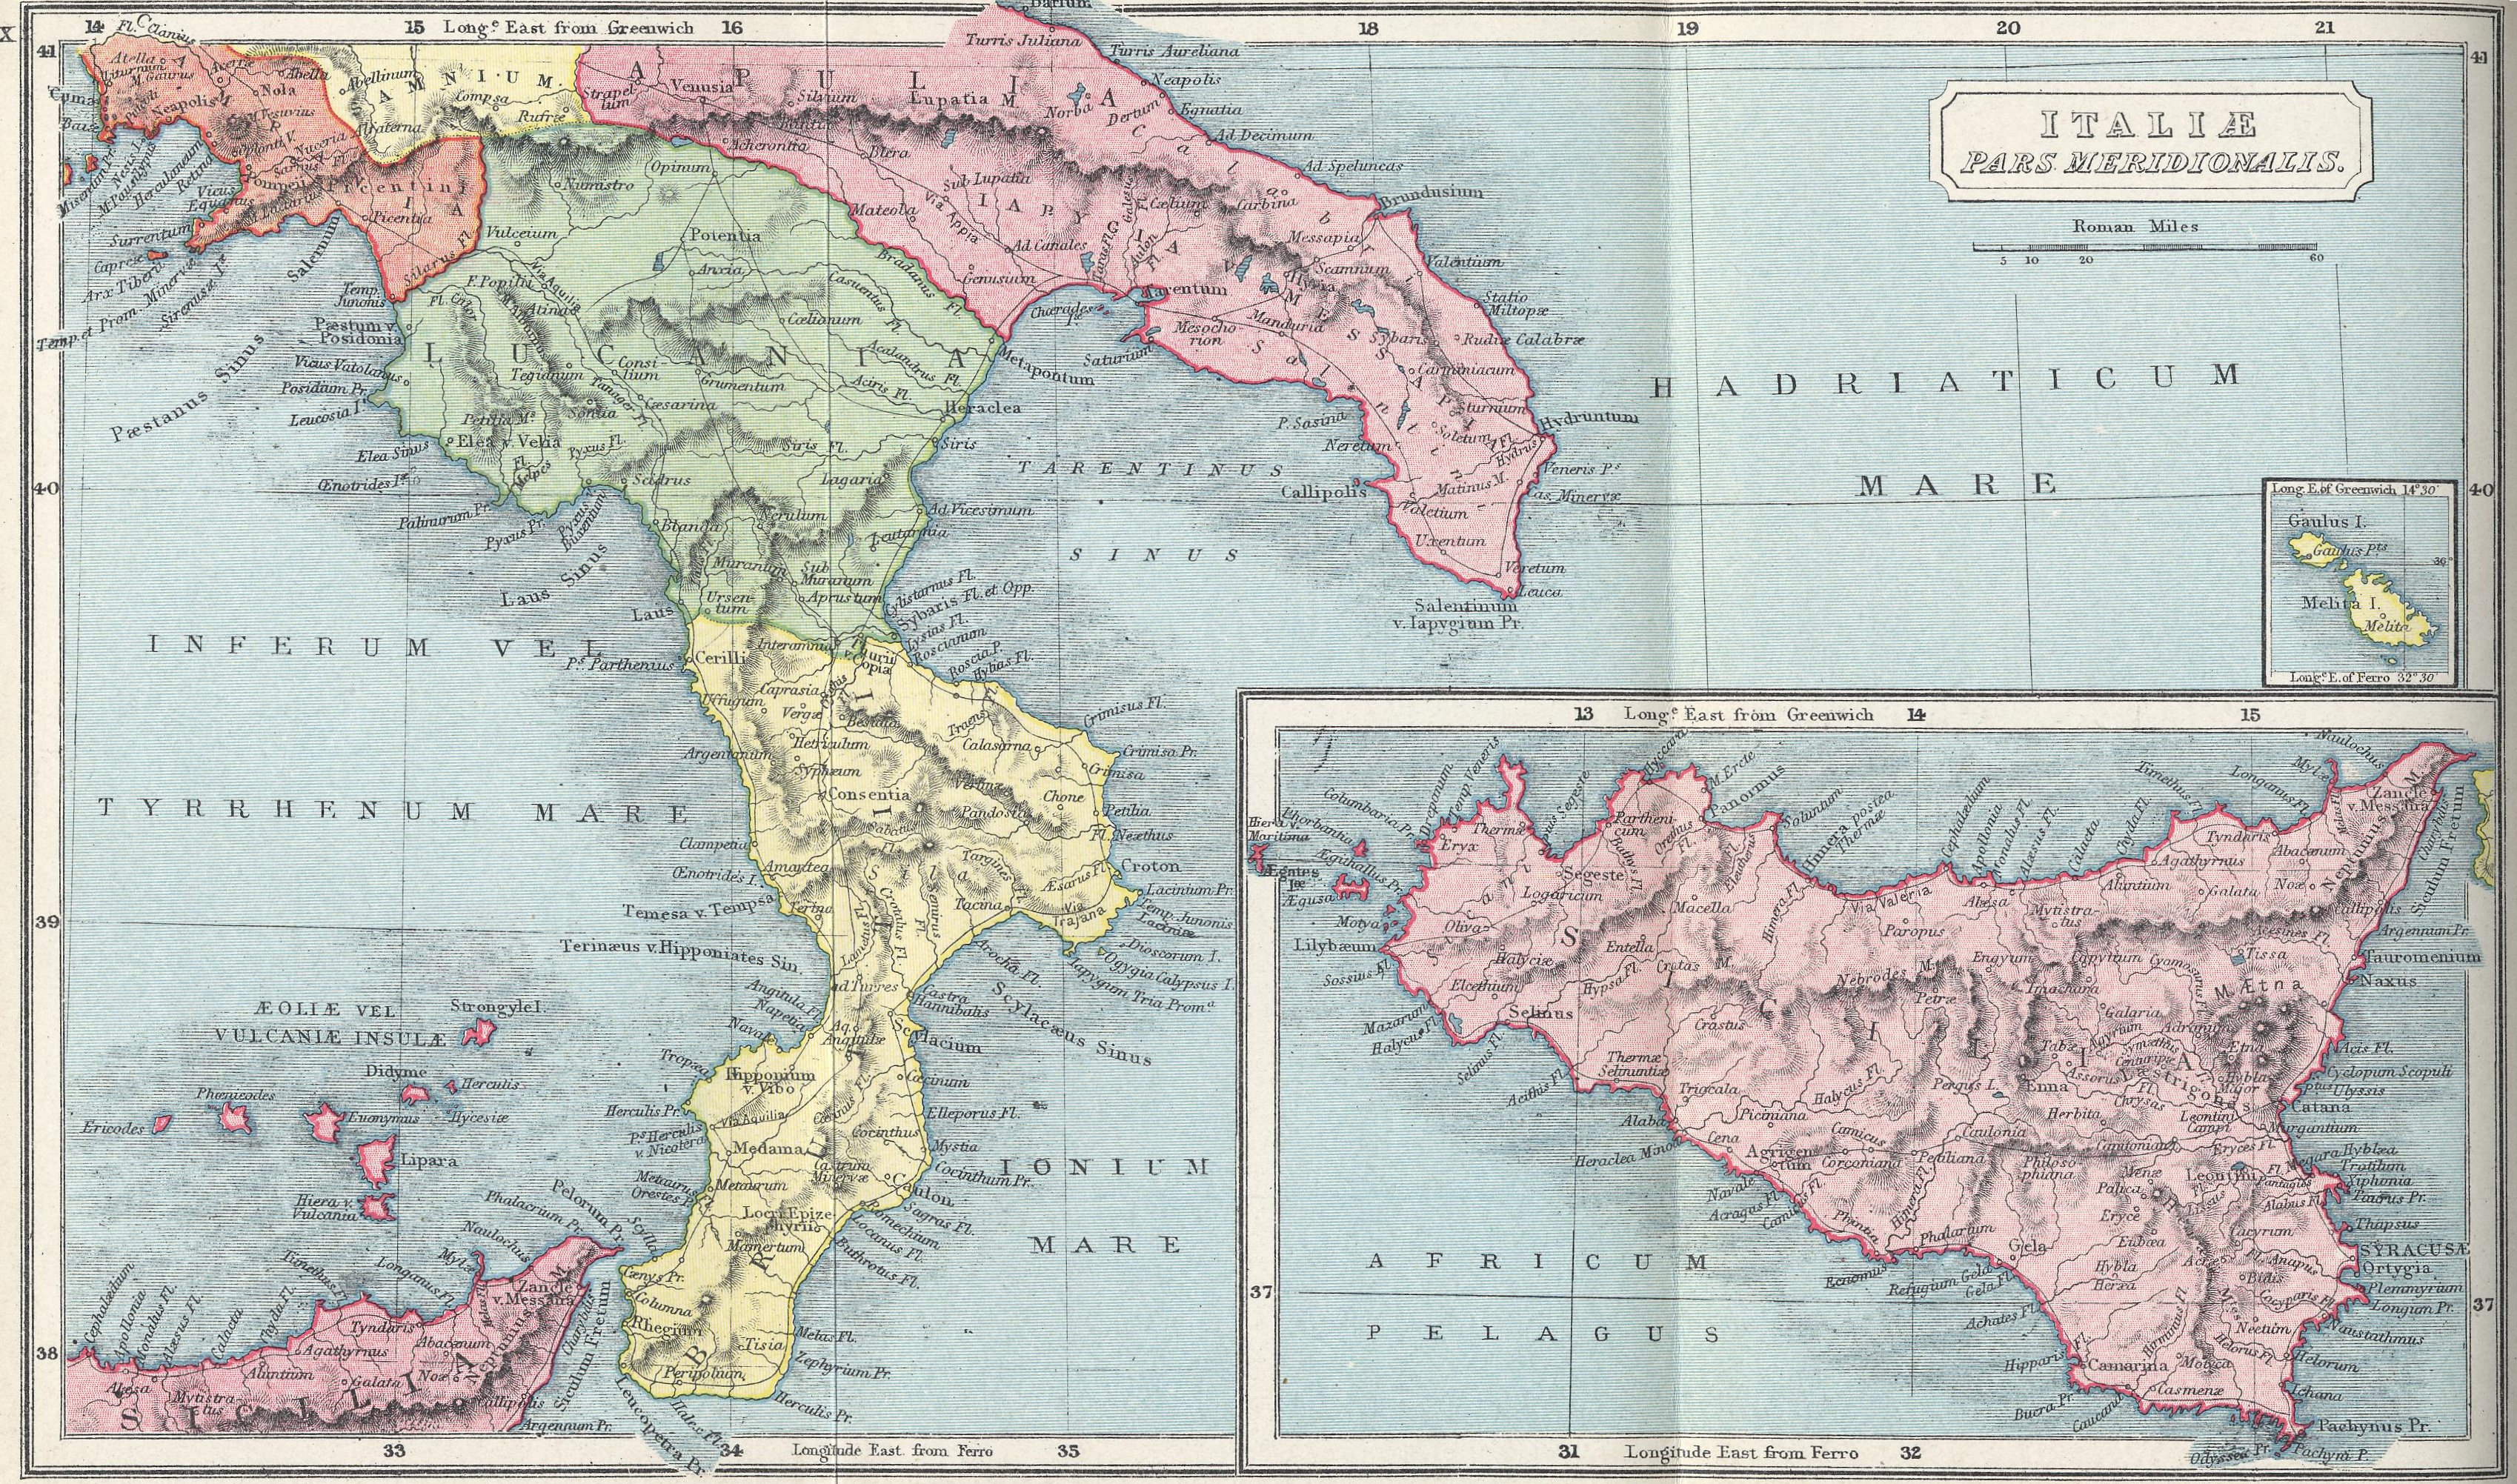 Map of Southern Italy 70 BC - AD 180 with inset of Sicily